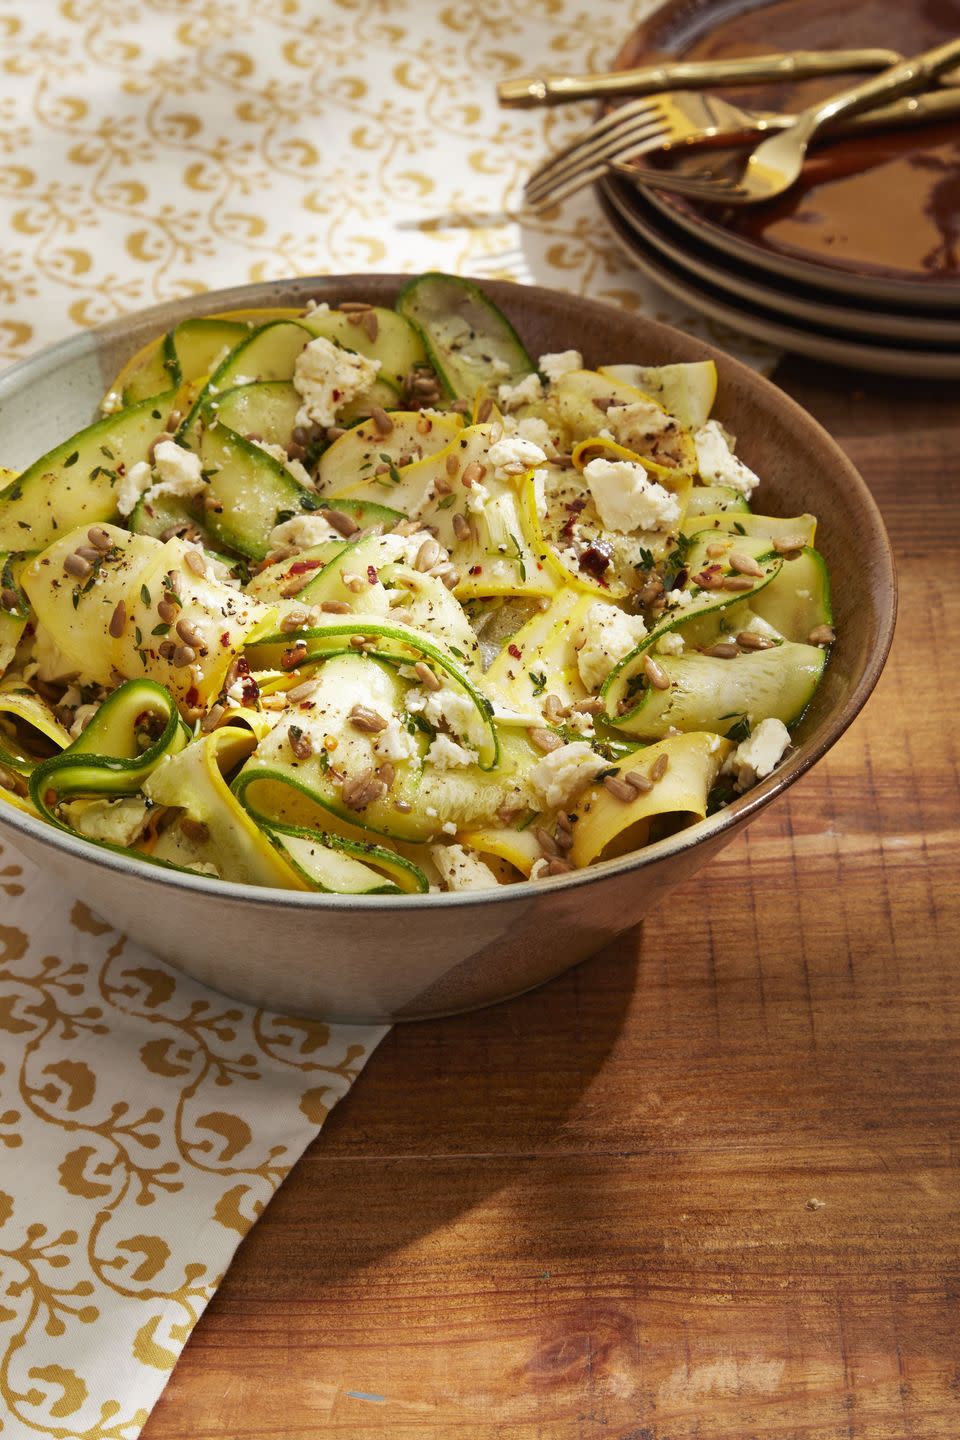 8) Squash Ribbon Salad with Sunflower Seeds